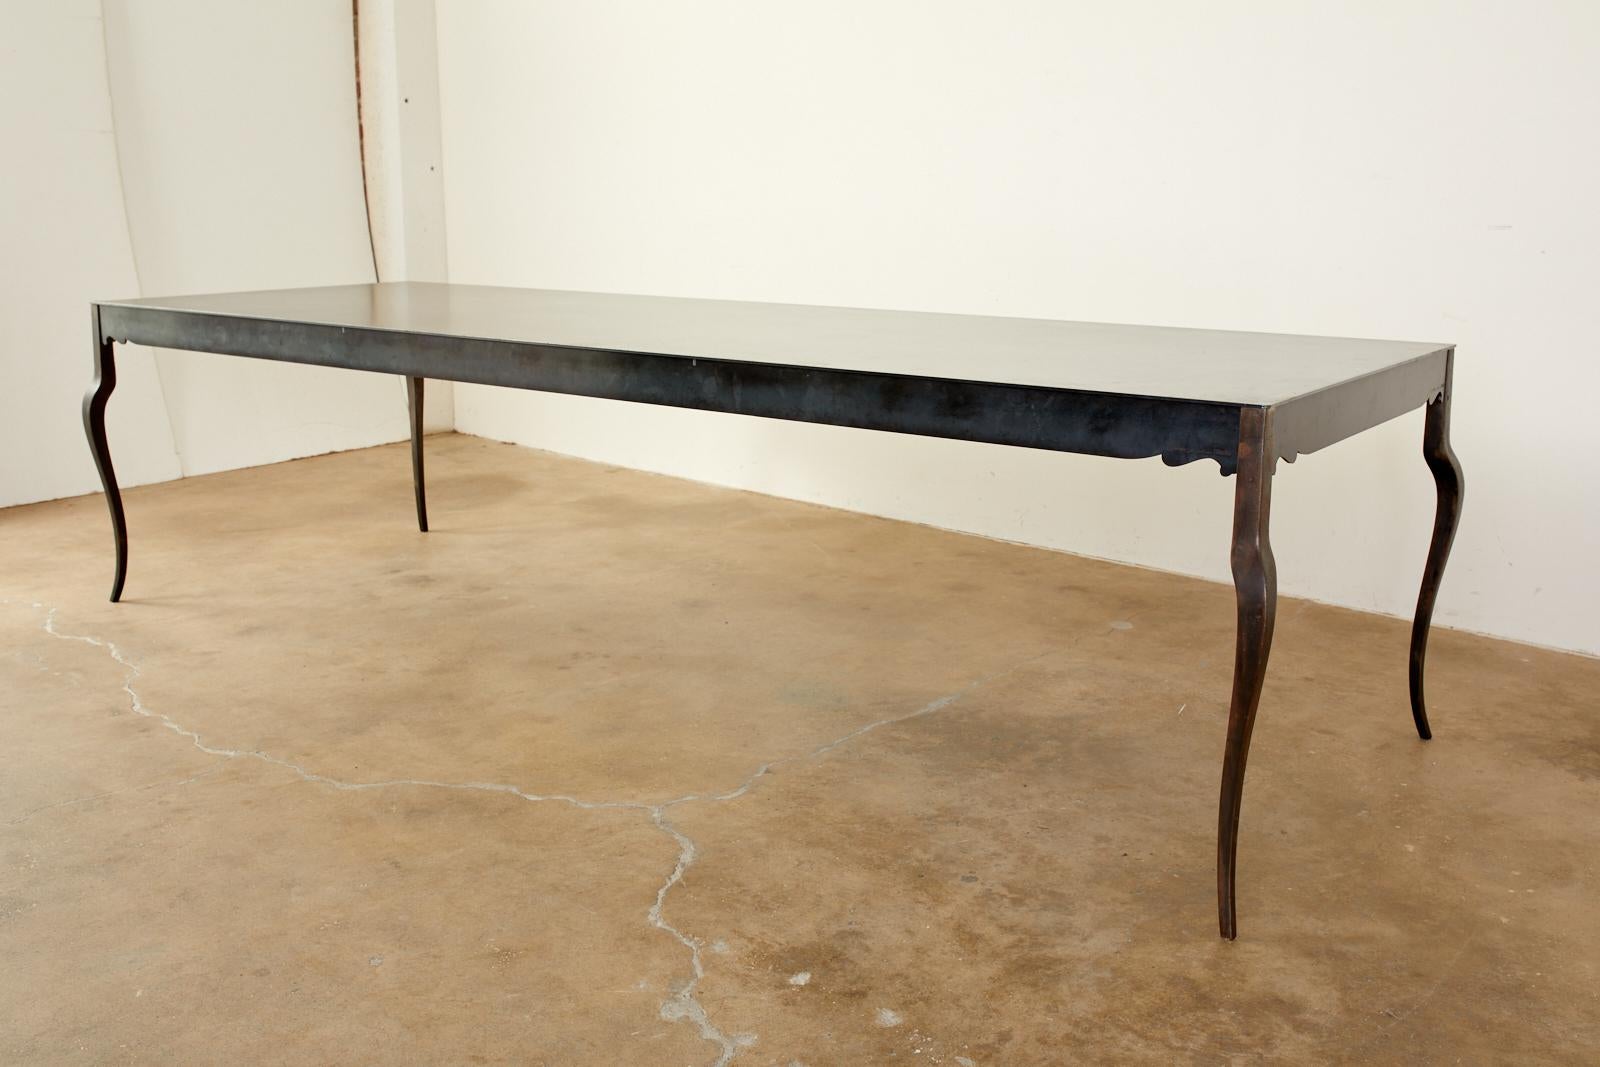 South African Modern Steel Foundry Dining Table by Gregor Jenkin Studio